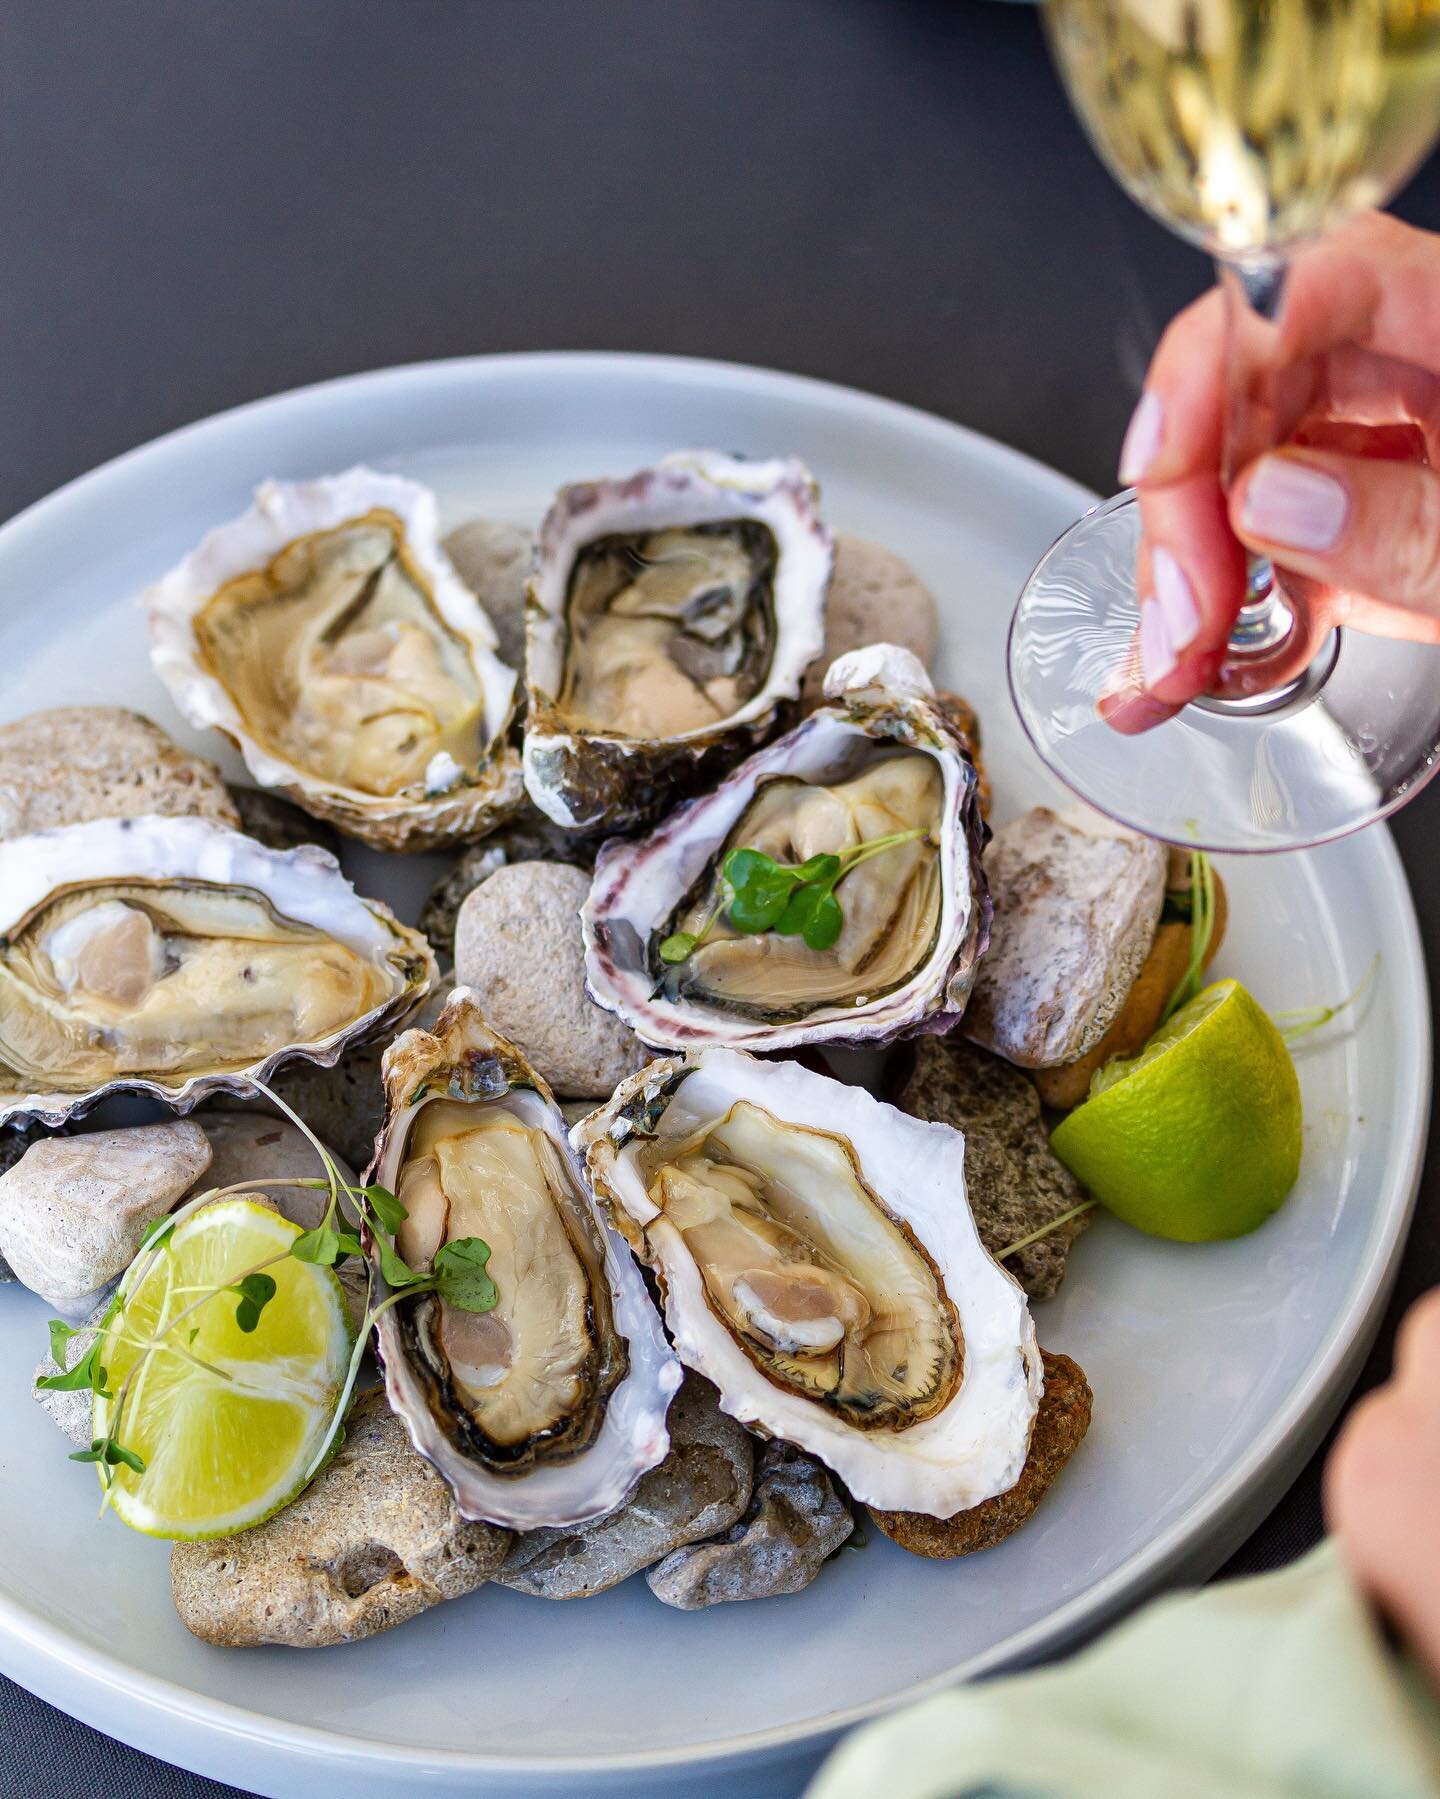 Finish your day sparkling 🥂
 
A better combination you&rsquo;ll battle to beat; oysters and flowing bubbly make for the perfect way to close in the day. 
 
And trust us- it always tastes better served by the sea 🌊